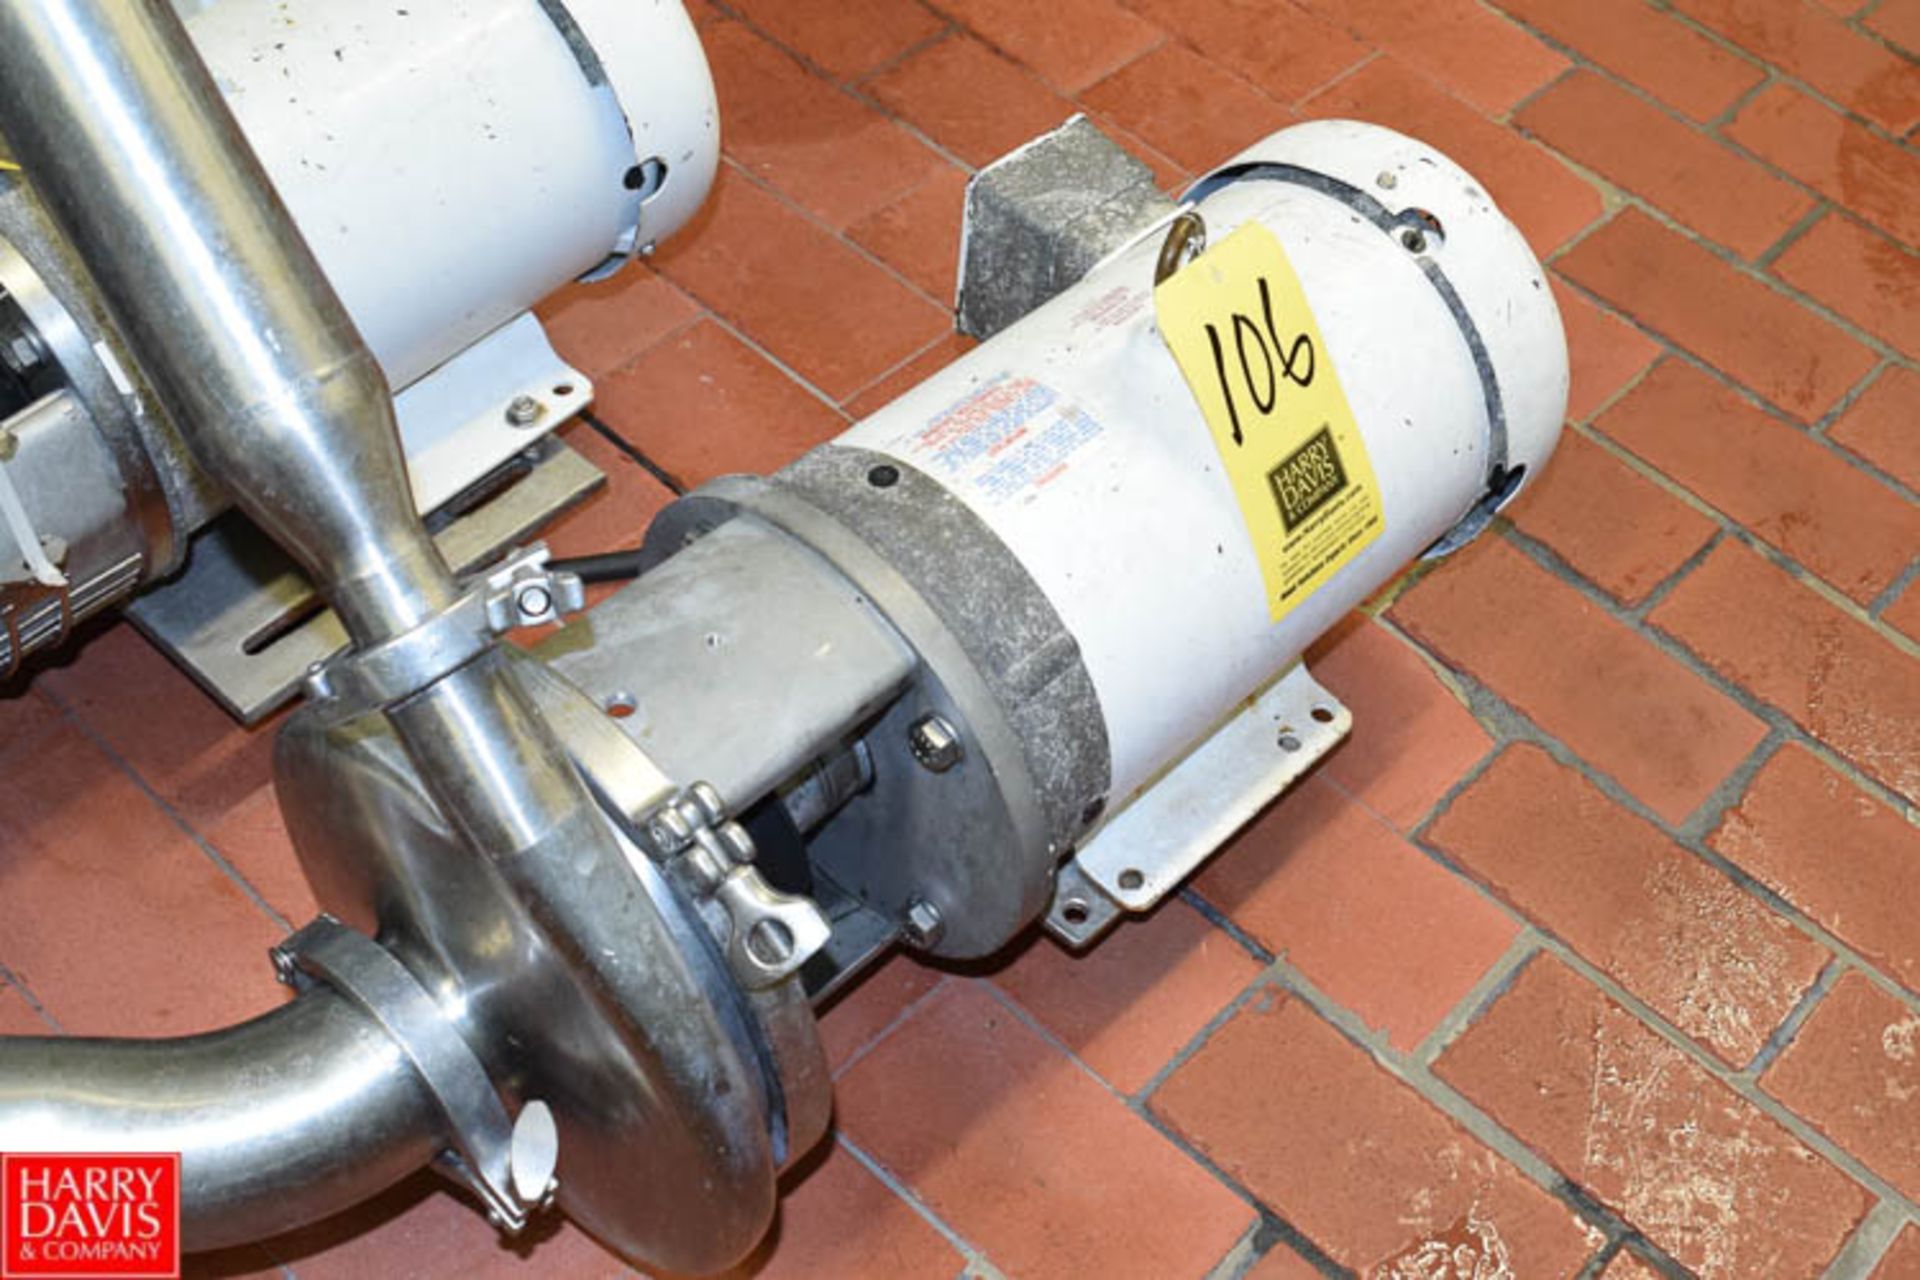 Ampco 5 HP Pump with Baldor 1,745 RPM Motor and 3" x 1.5" S/S Head, Clamp Type - Rigging Fee: $ 75